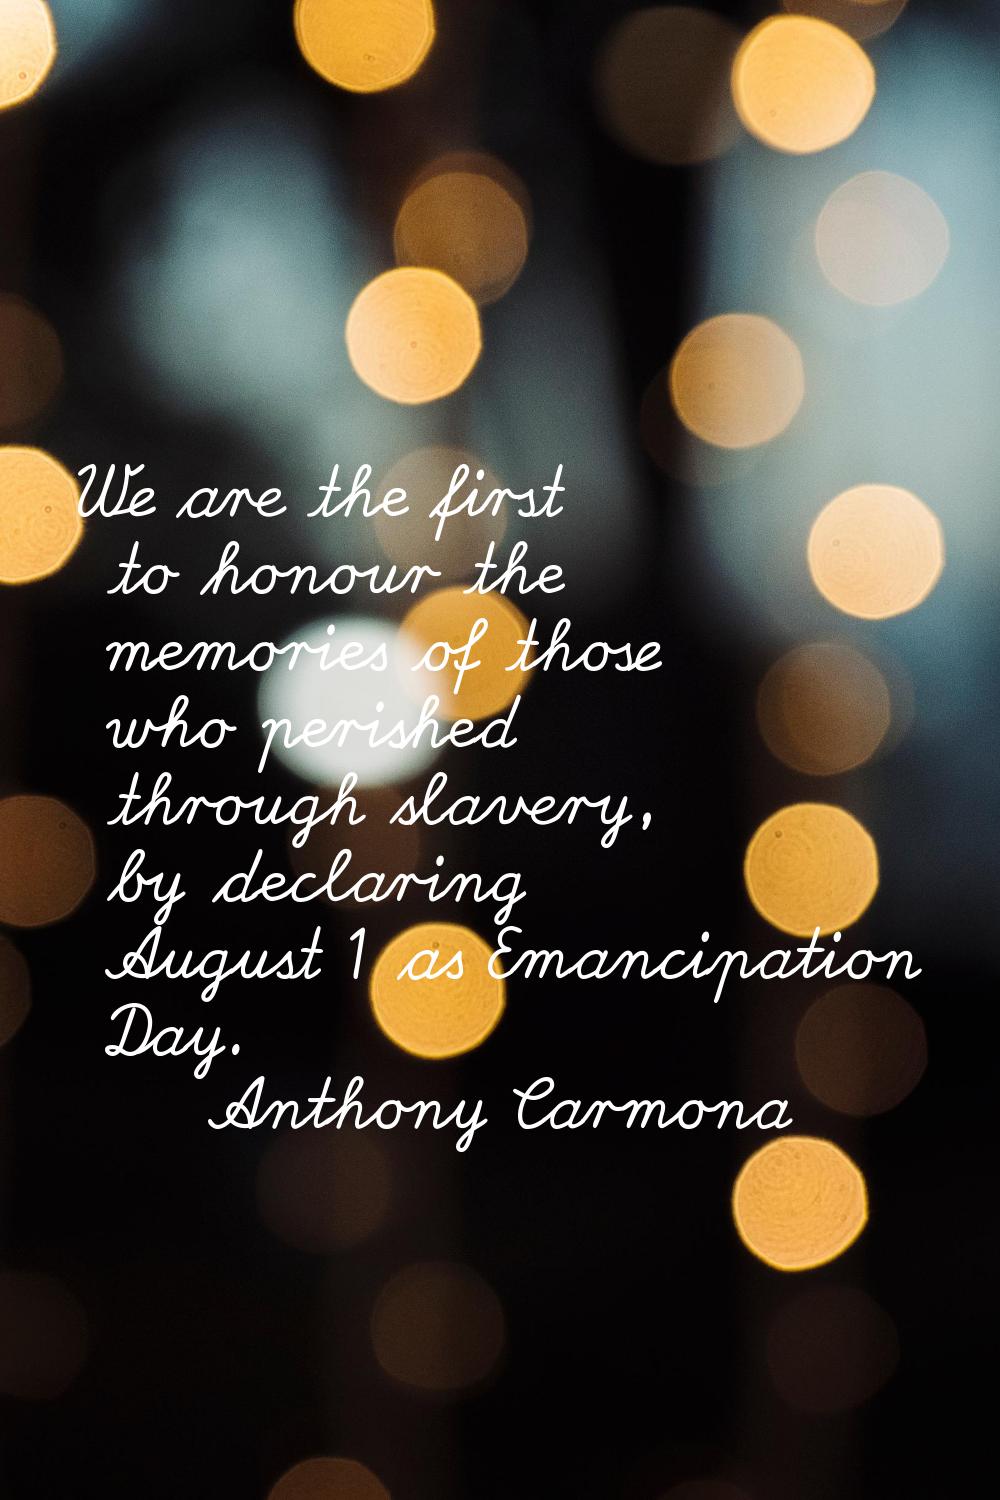 We are the first to honour the memories of those who perished through slavery, by declaring August 